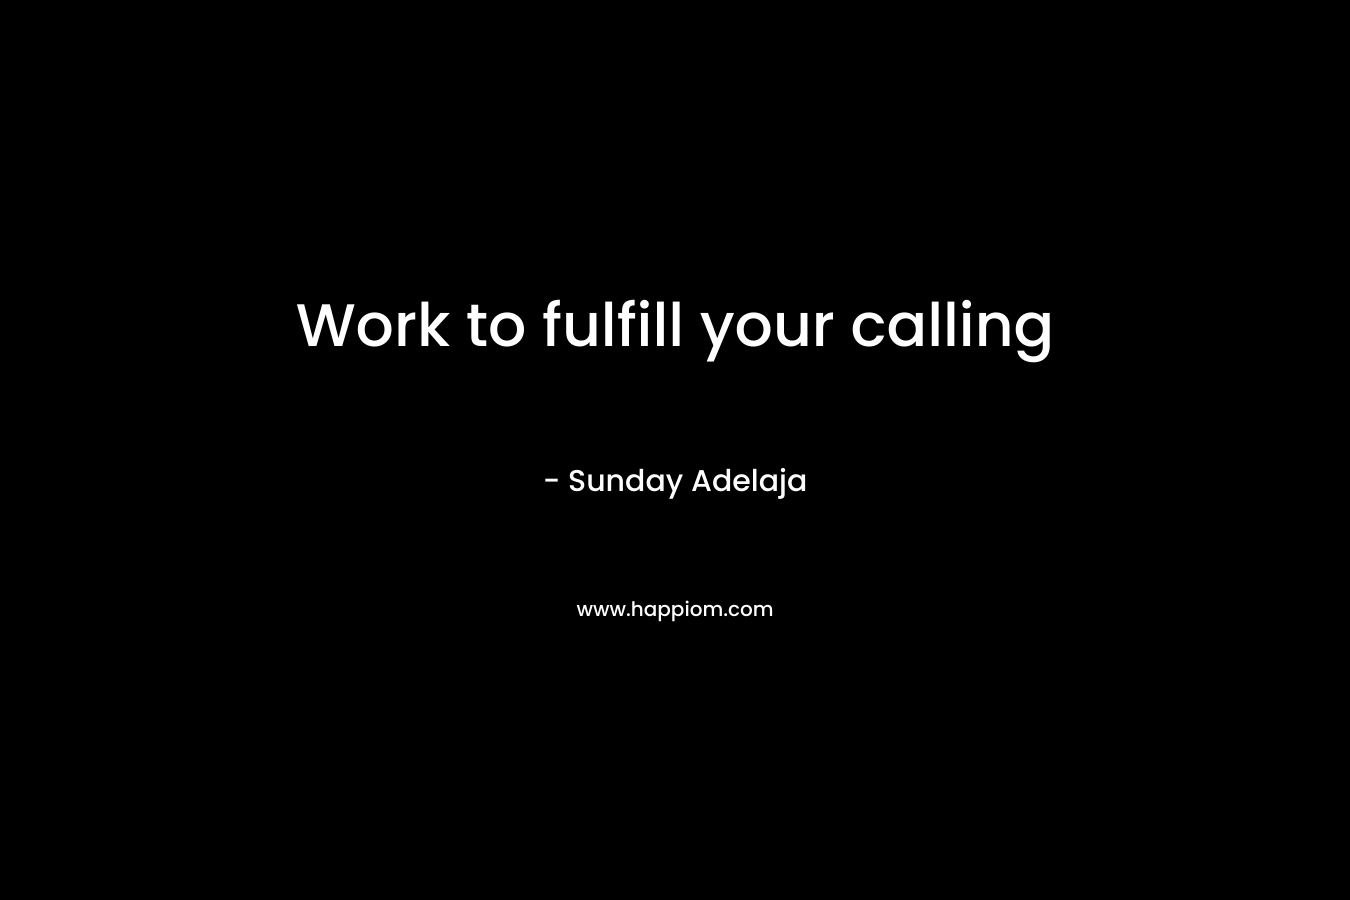 Work to fulfill your calling